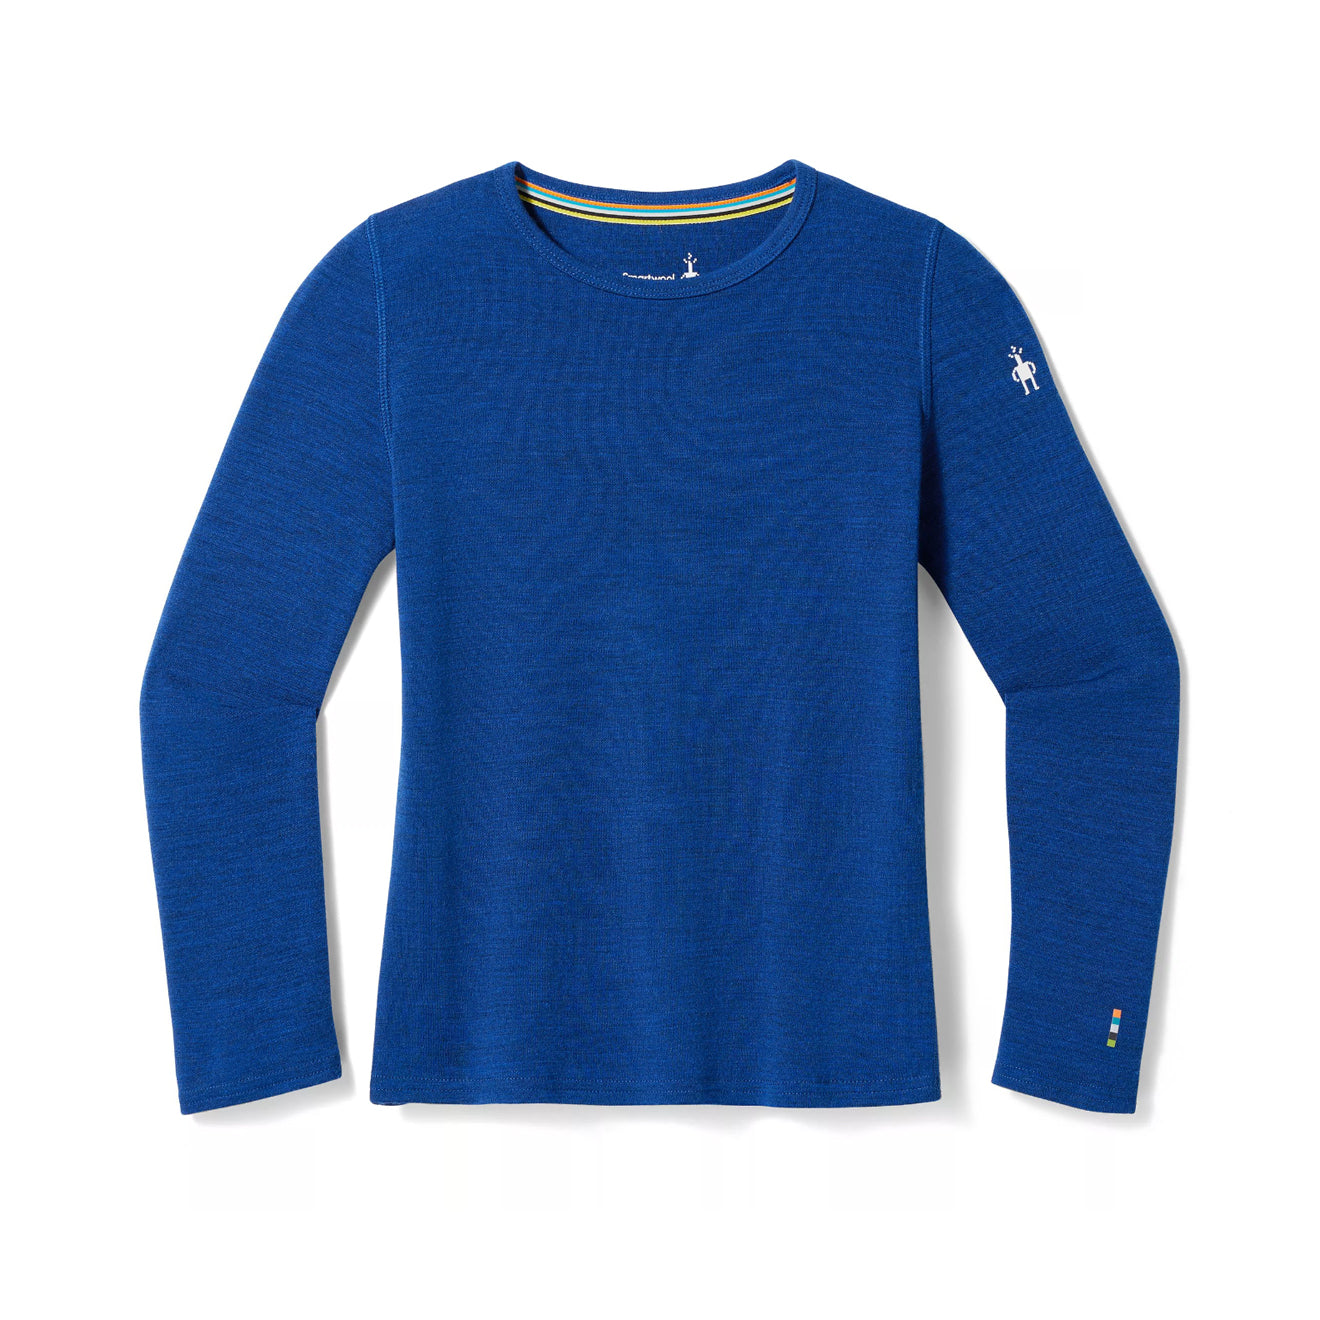 Kids' Classic Thermal Merino Base Layer Crew, BLUEBERRY HILL HEATHER